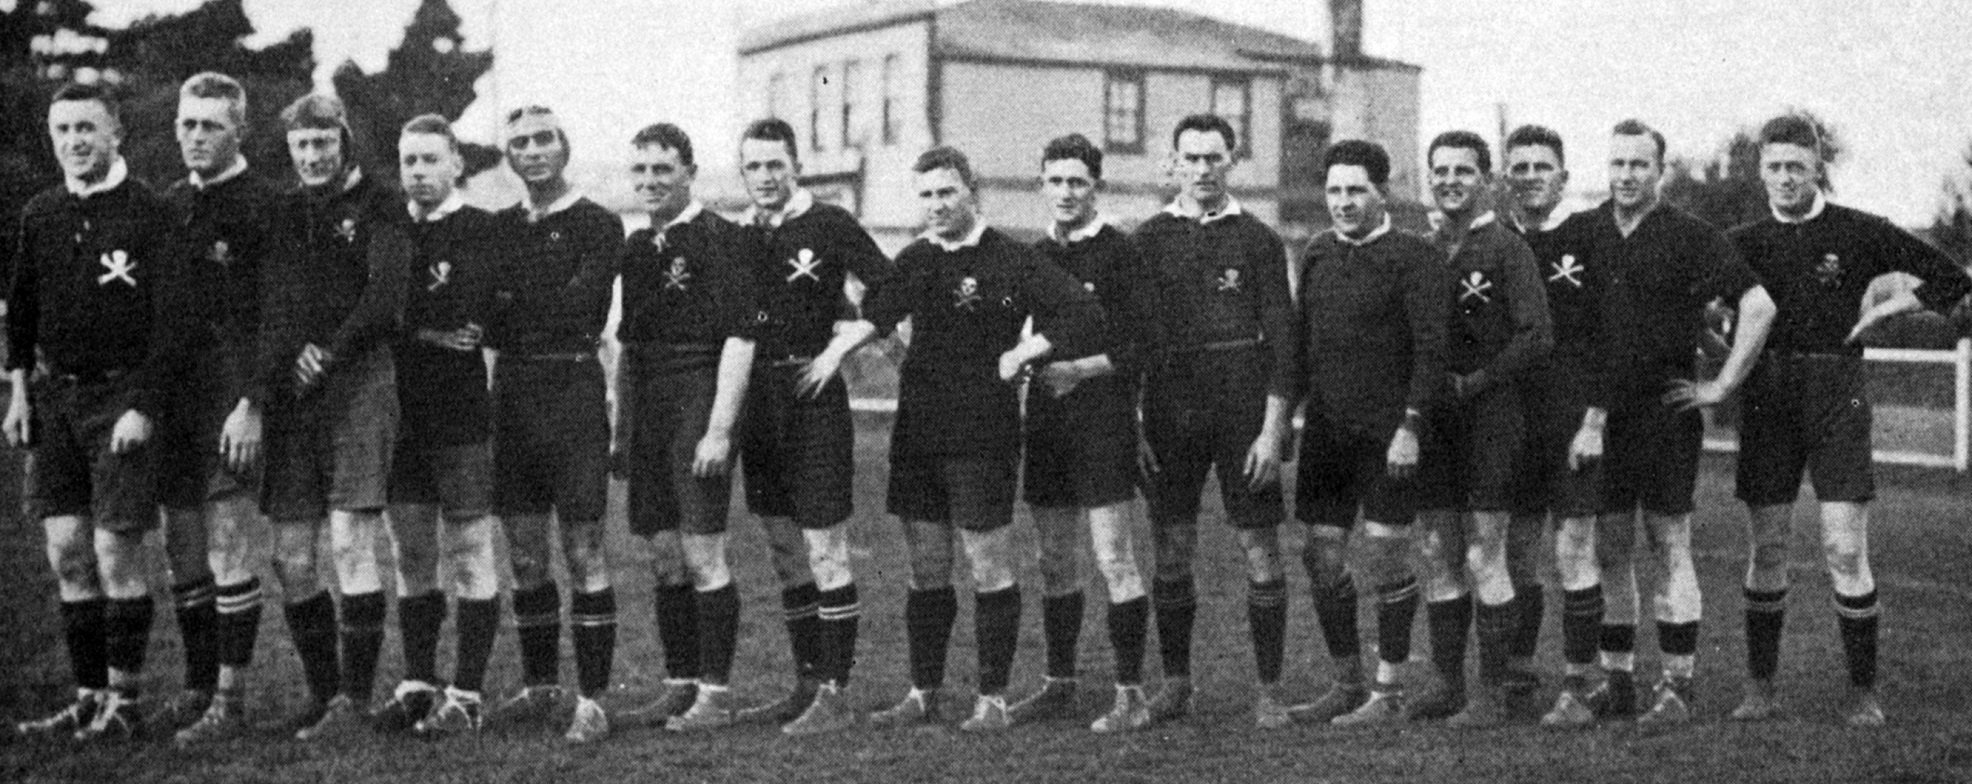 The Pirates rugby team. — Otago Witness, 10.6.1924 